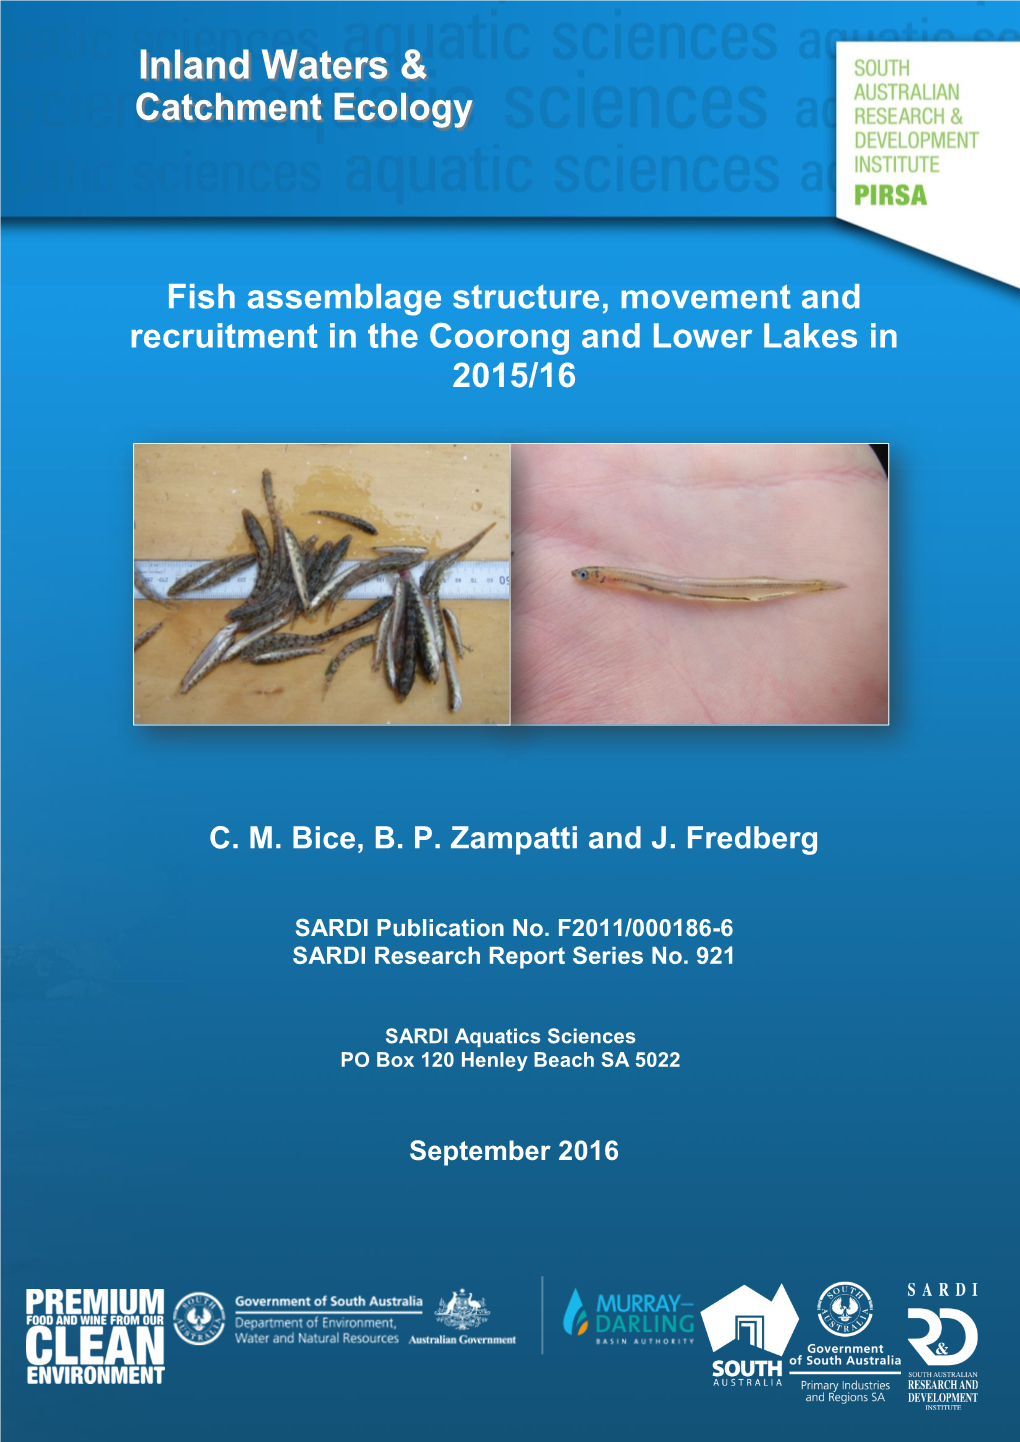 Fish Assemblage Structure, Movement and Recruitment in the Coorong and Lower Lakes in 2015/16